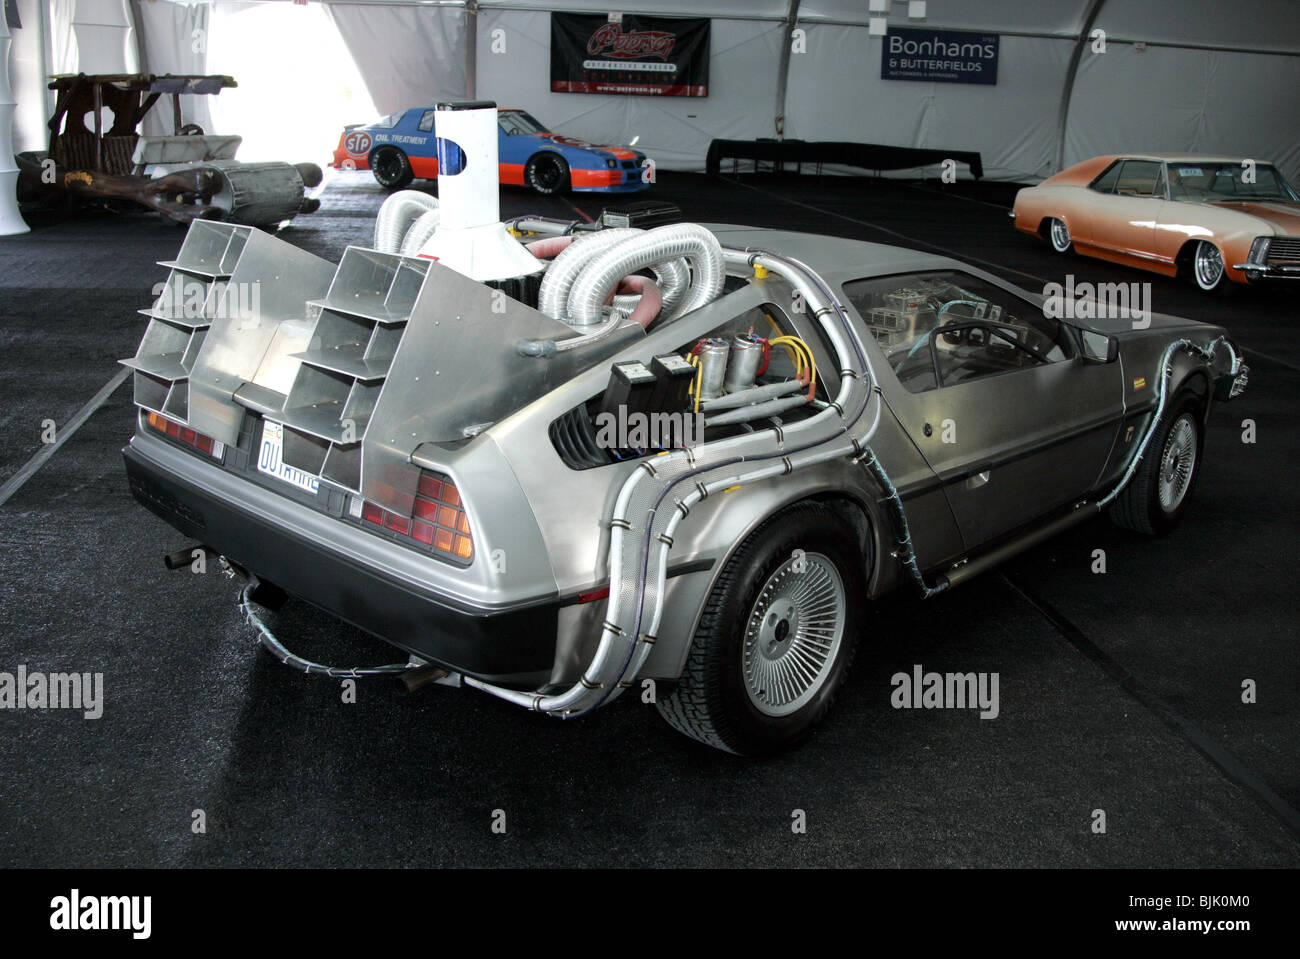 BACK TO THE FUTURE 3 1981 DELOREAN GEORGE BARRIS COLLECTION OF KU PETERSEN MUSEUM LOS ANGELES USA 13 May 2005 Stock Photo